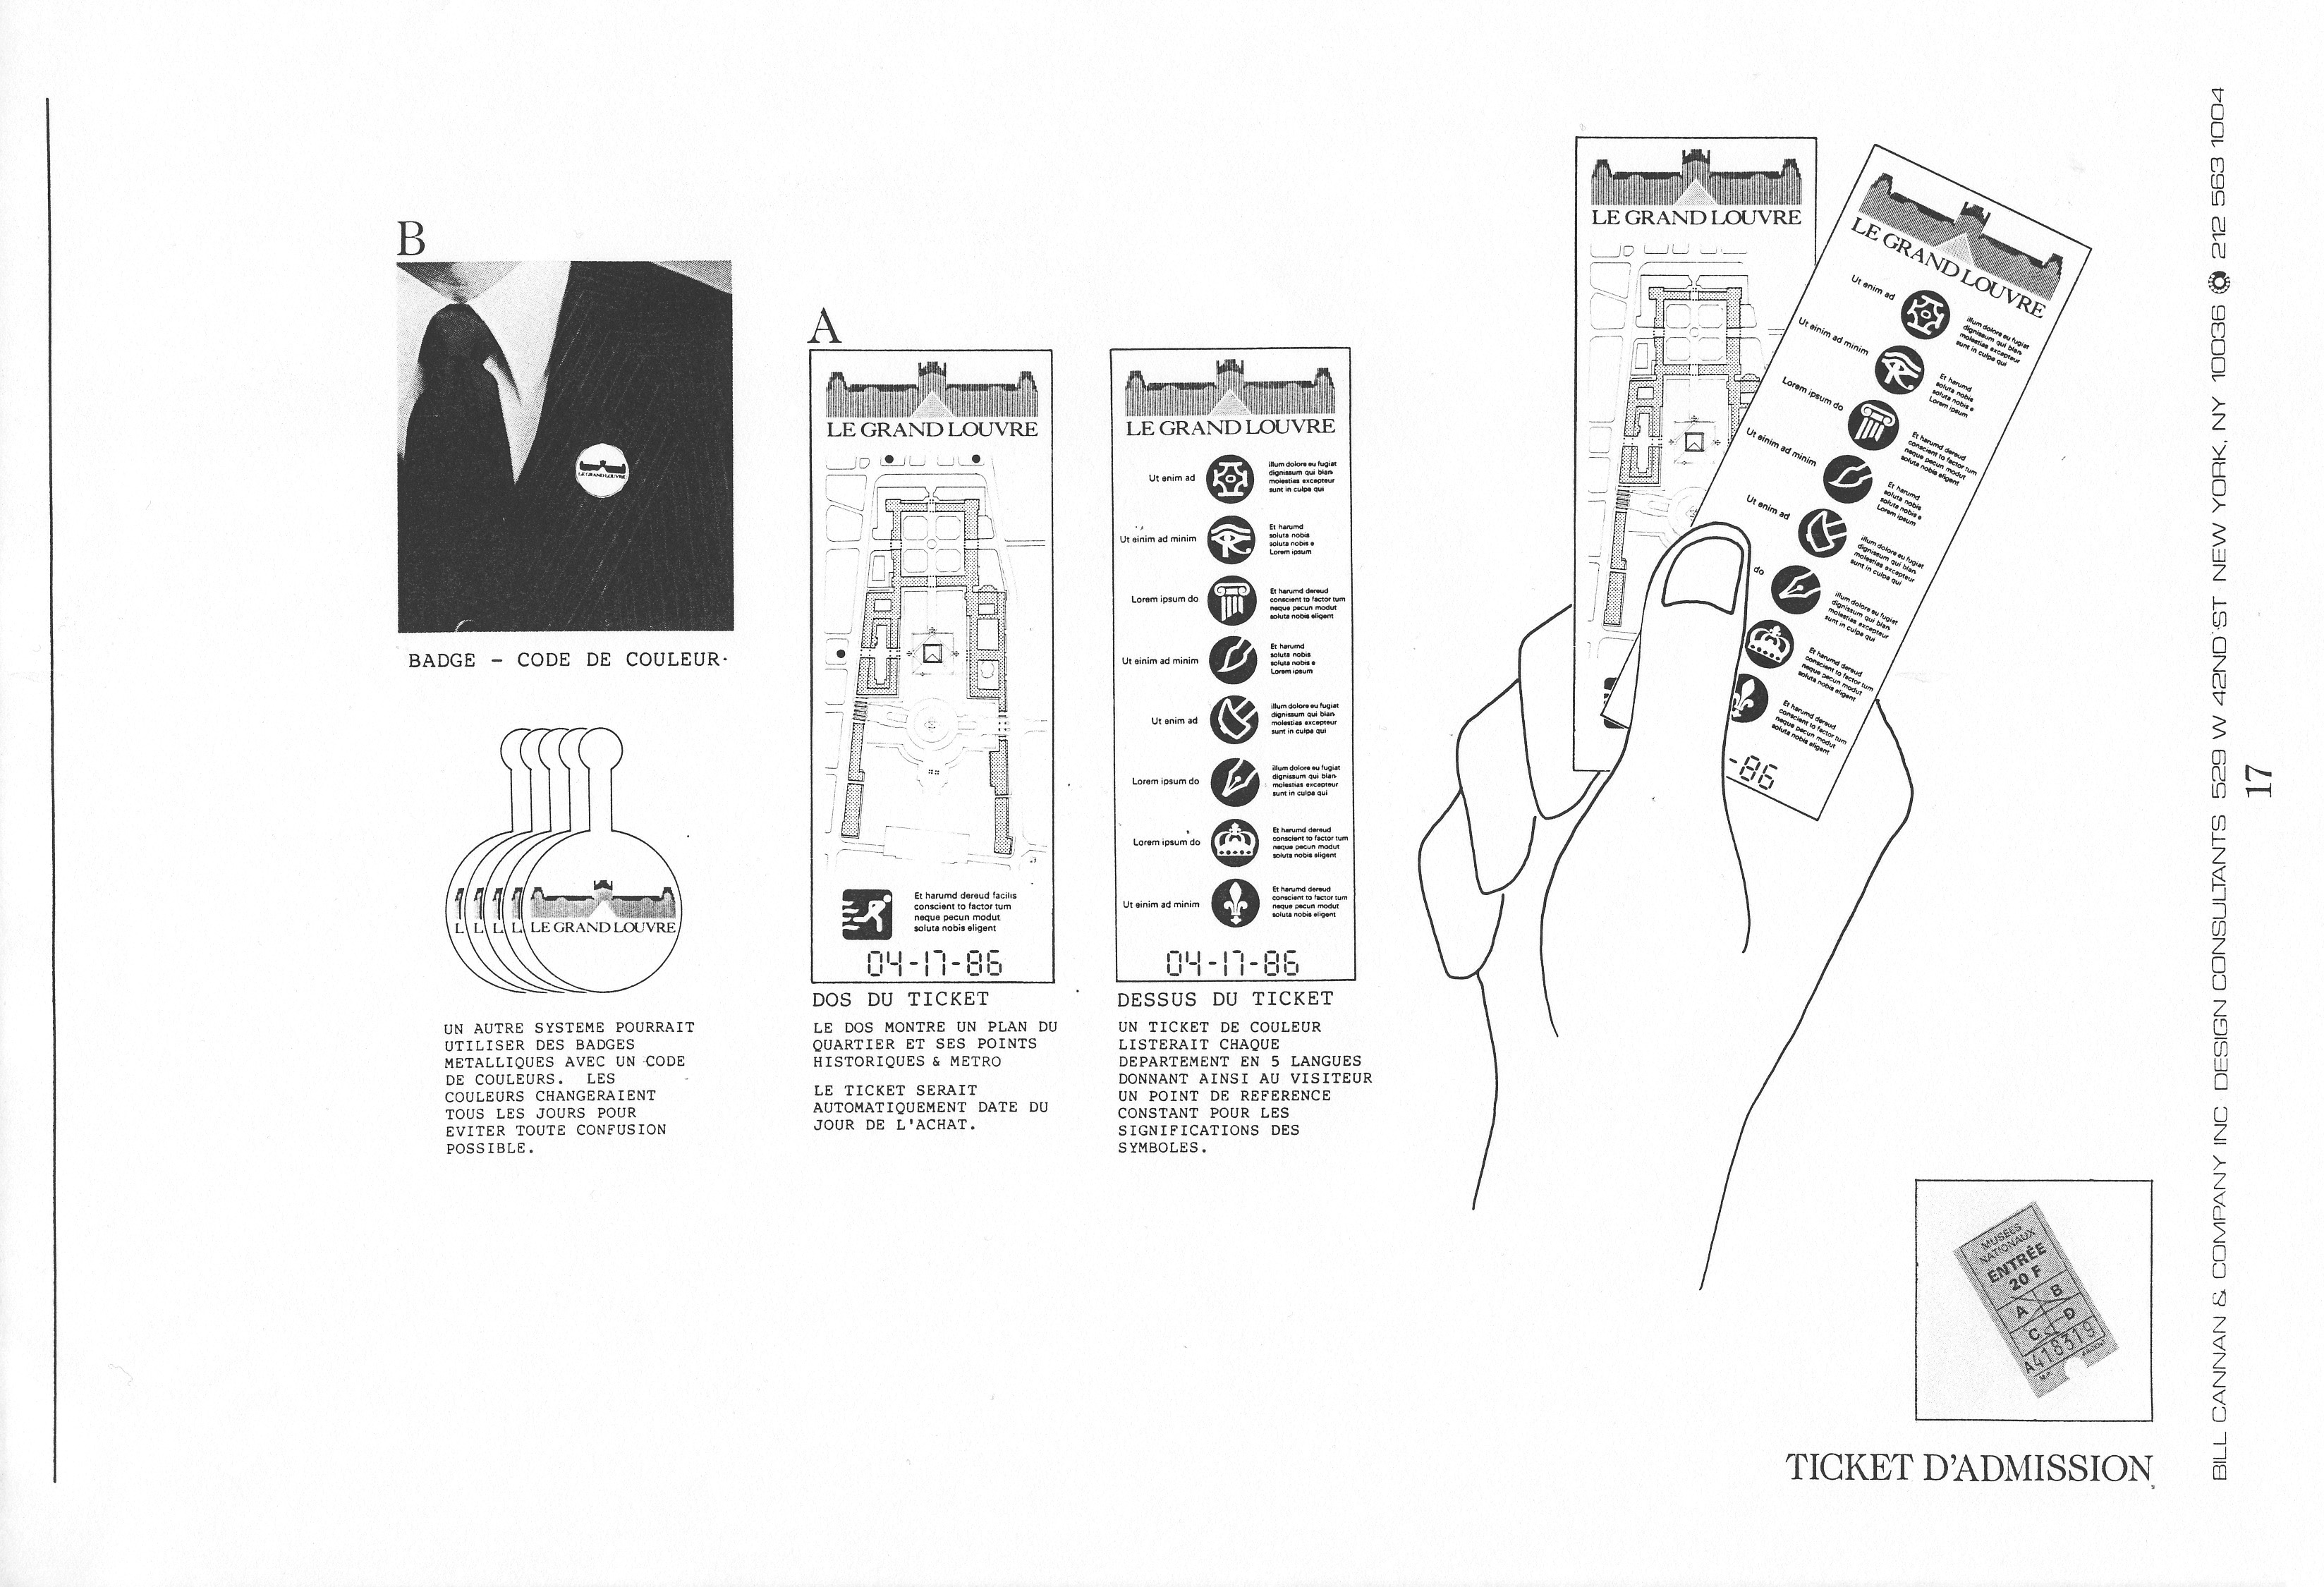 Drawings of the lapel button and the tickets as they would appear.